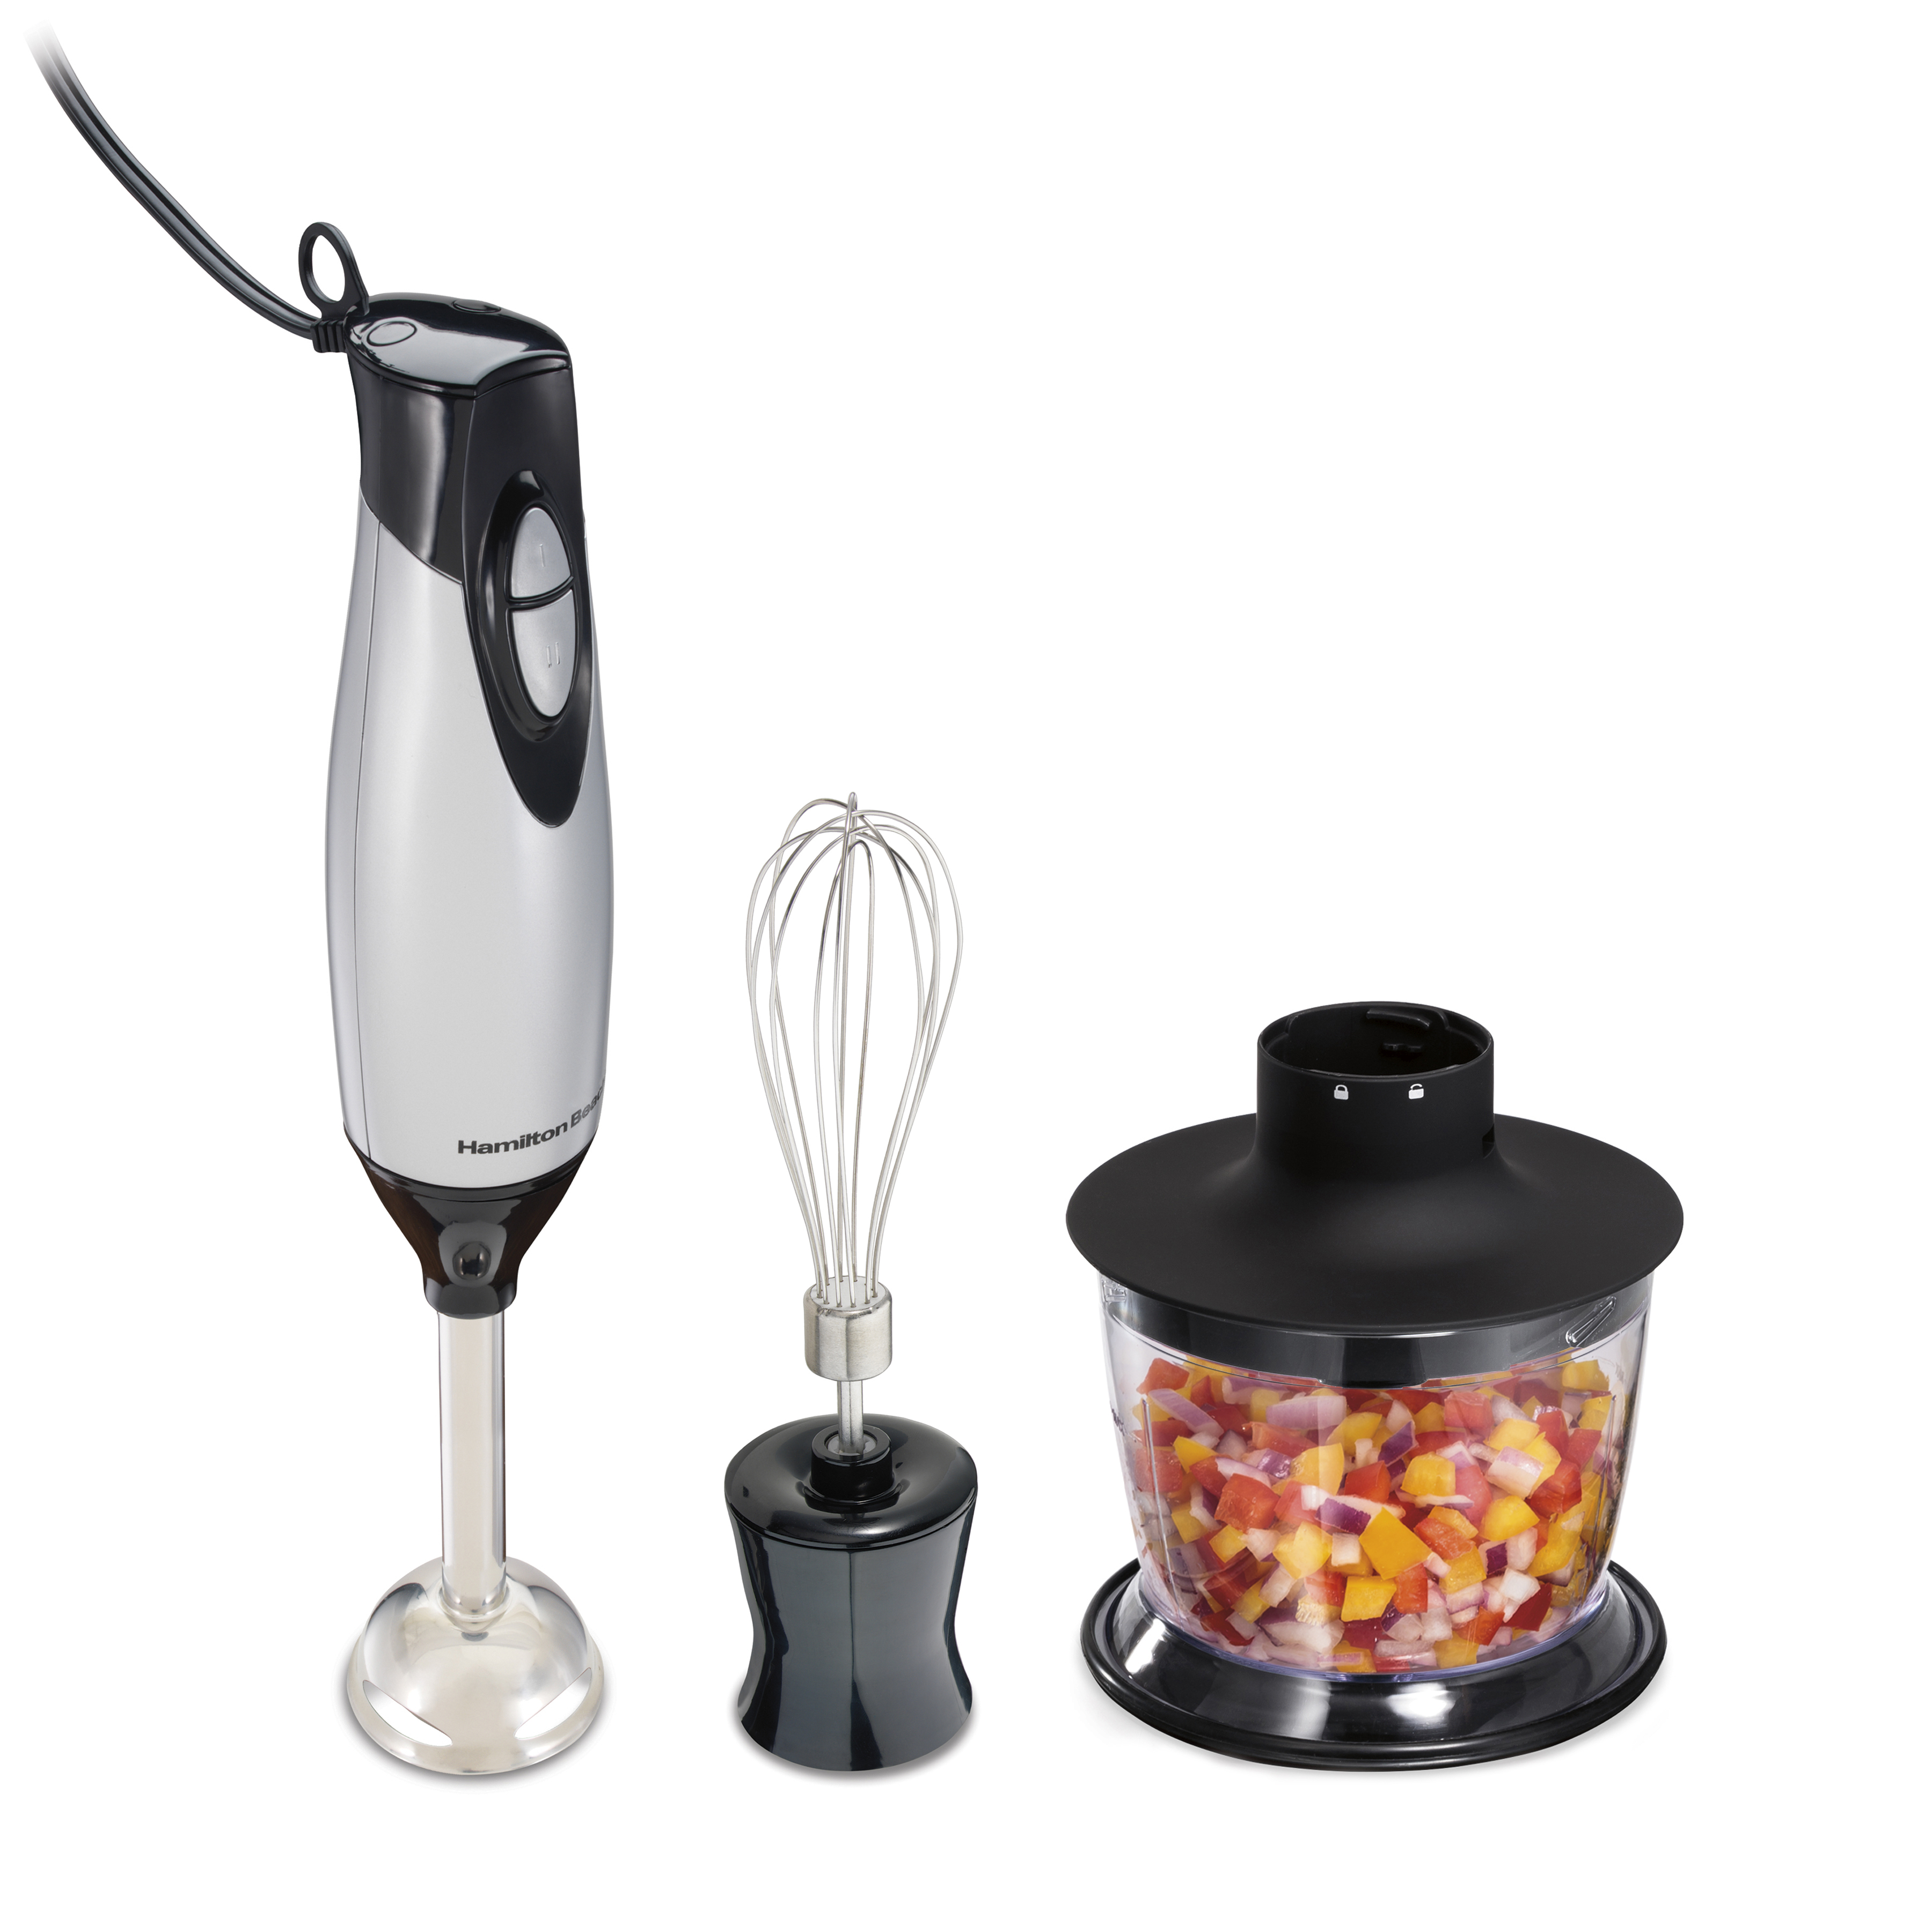 Hamilton Beach 4-in-1 Electric Immersion Hand Blender with Blending Wand, Whisk, and 3 Cup Food Chopping Bowl, Silver, 59765 - image 1 of 8